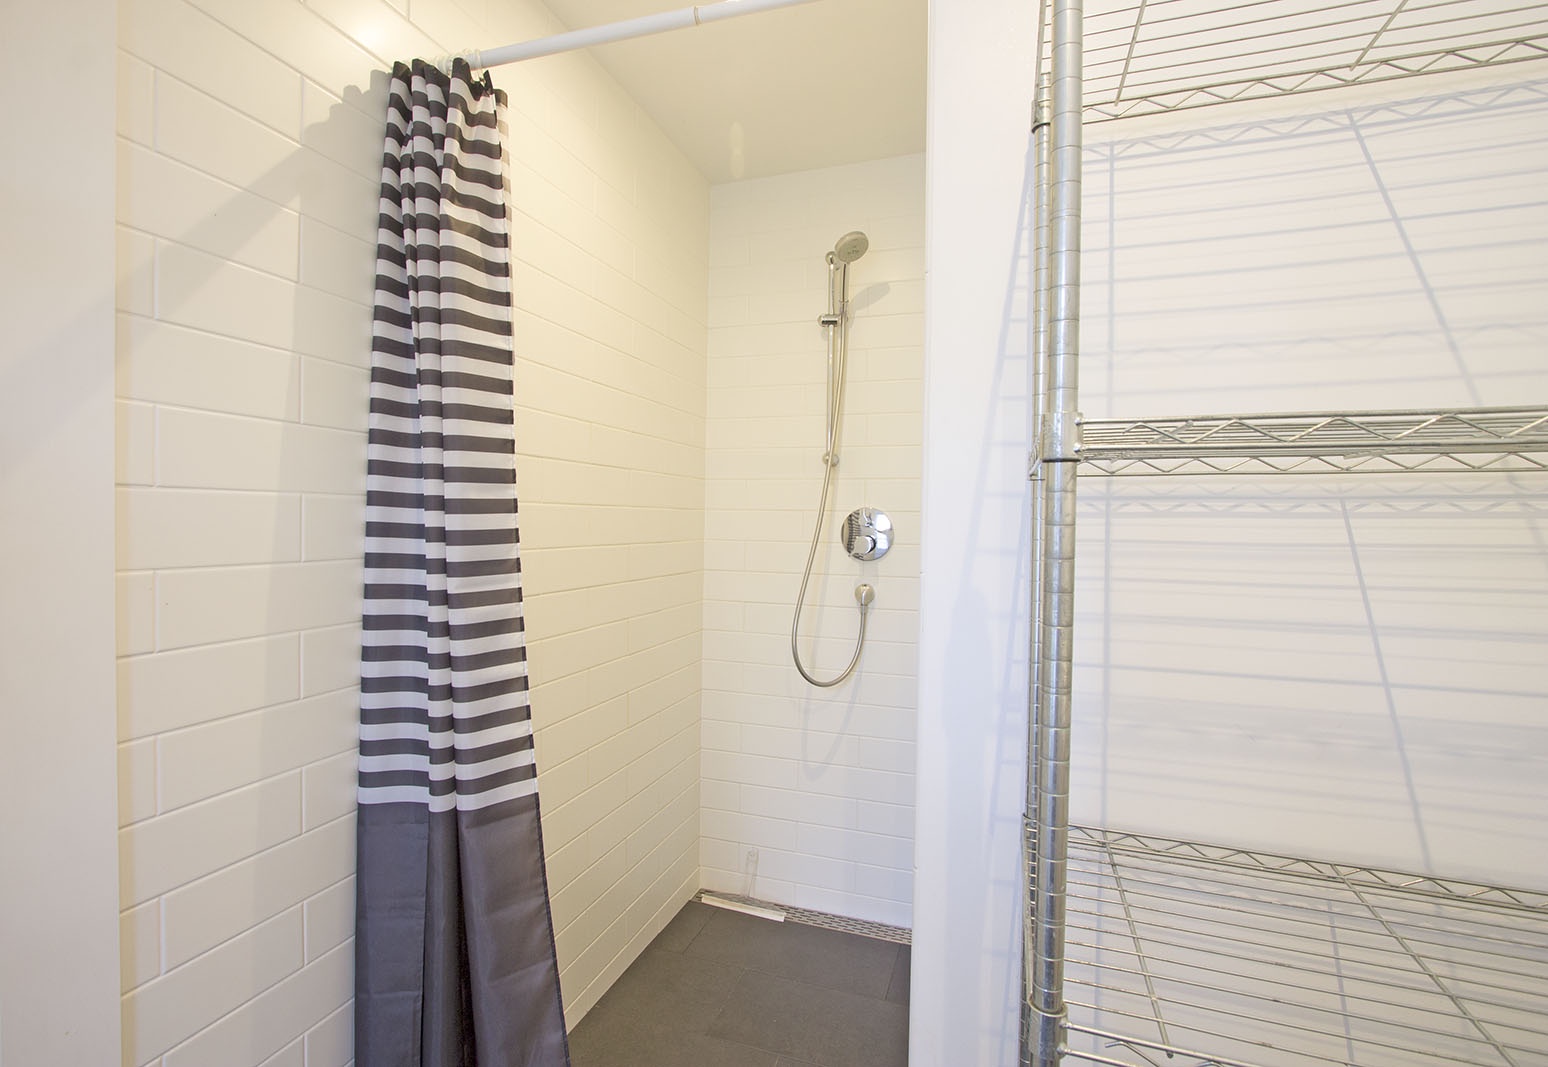 Upstairs is a European-style full bath with walk-in shower.